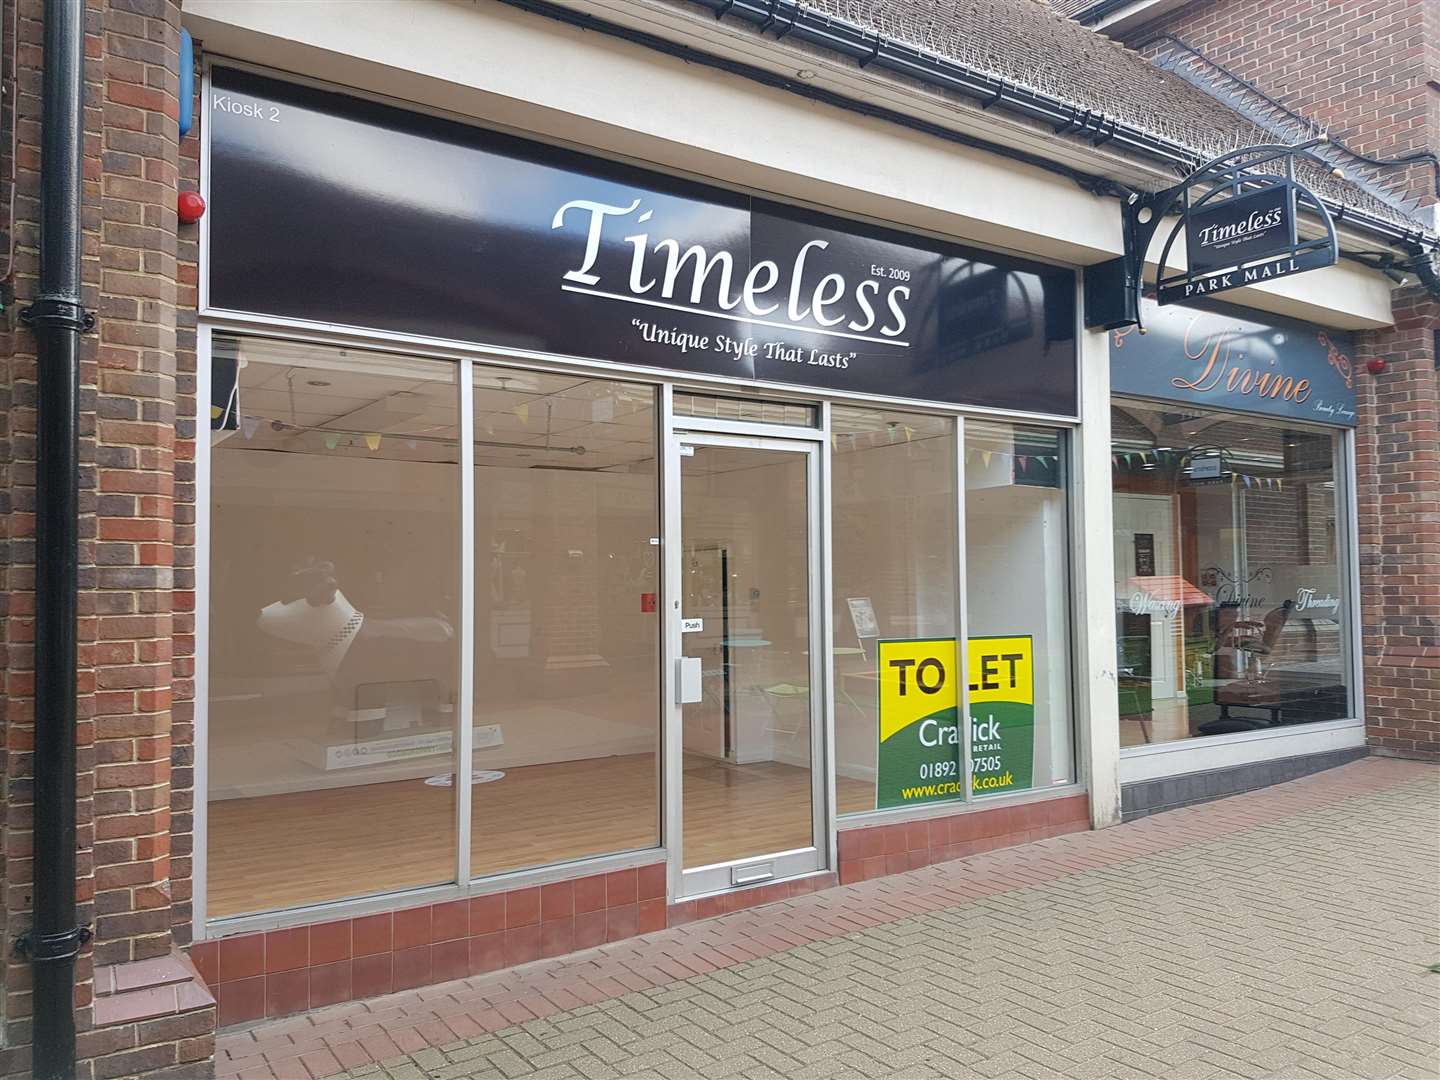 Timeless has run its course at its Park Mall location